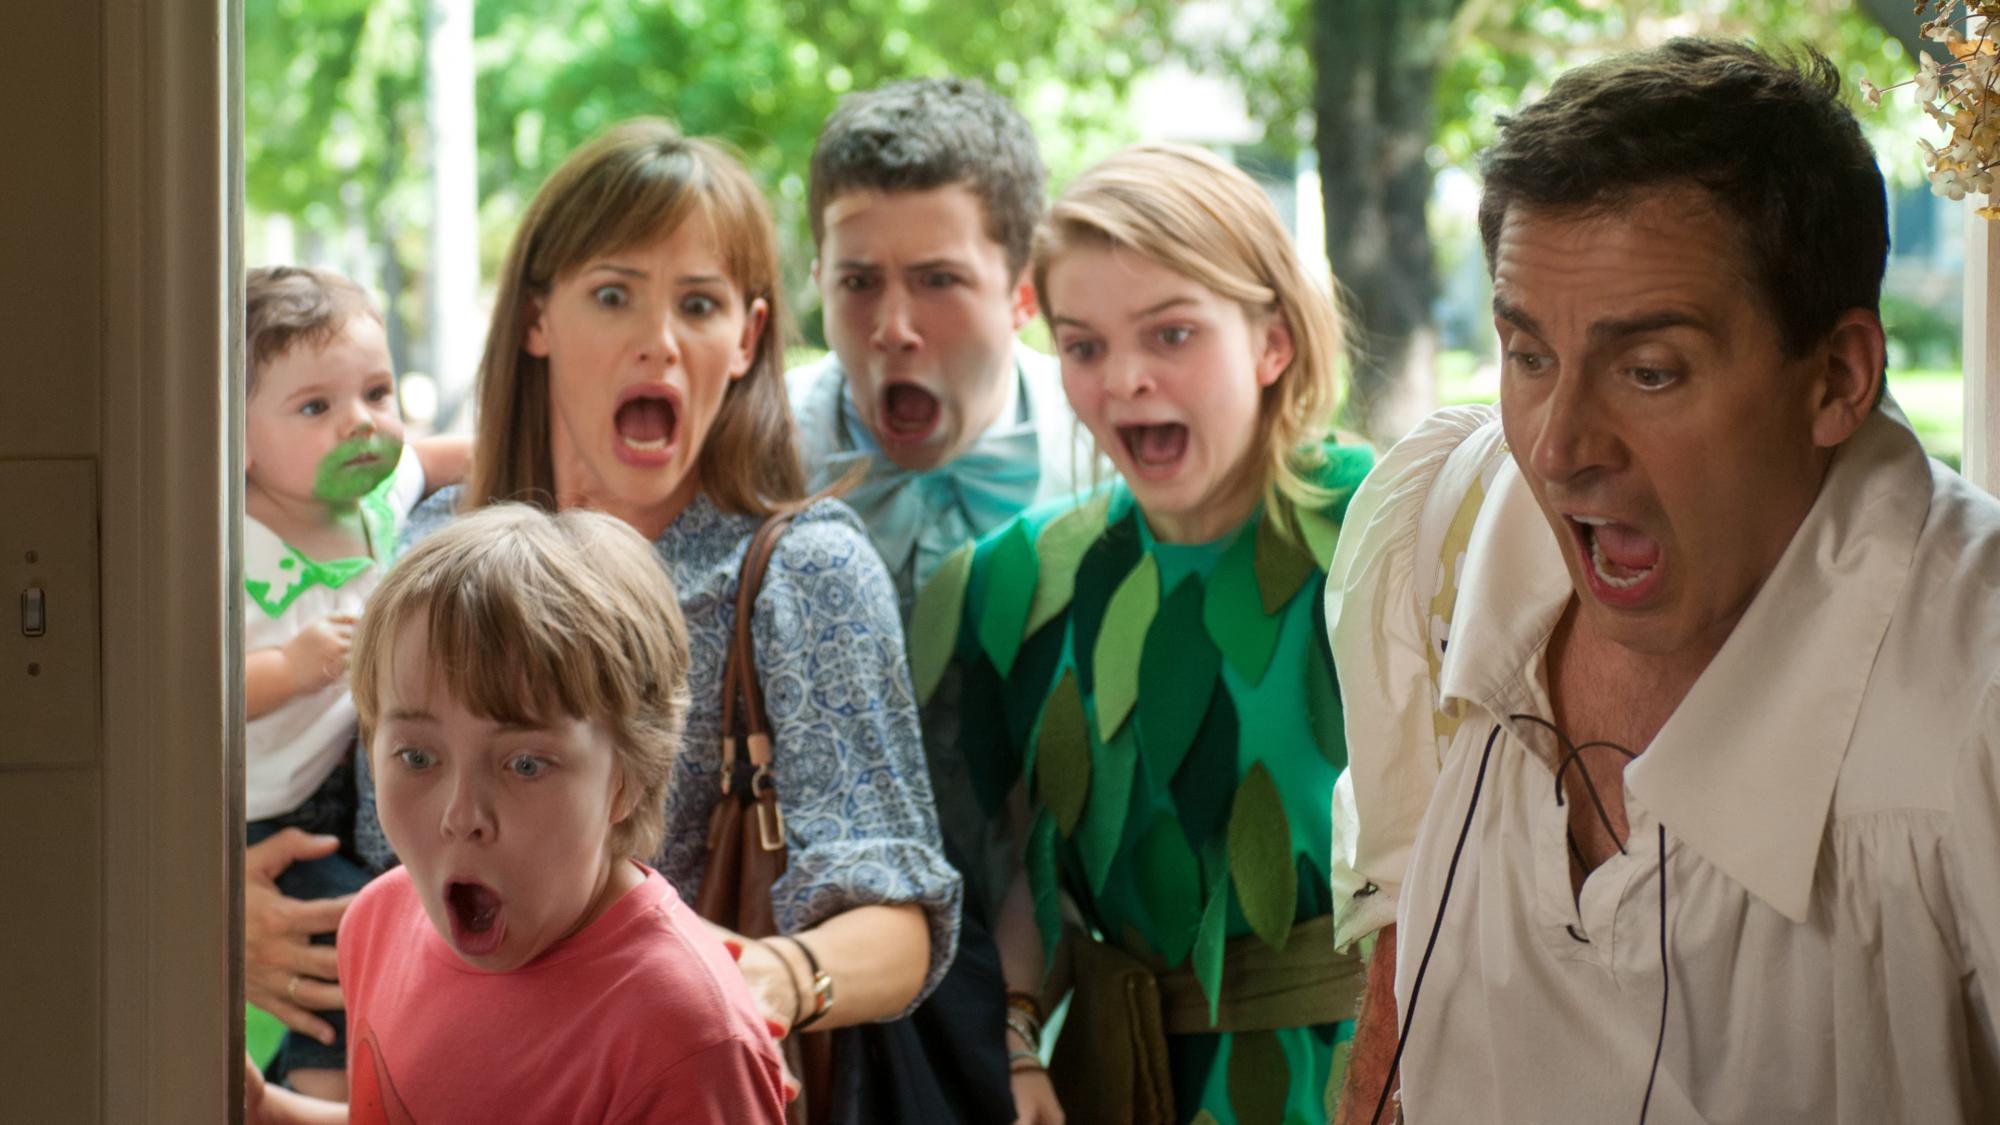 Backdrop Image for Alexander and the Terrible, Horrible, No Good, Very Bad Day